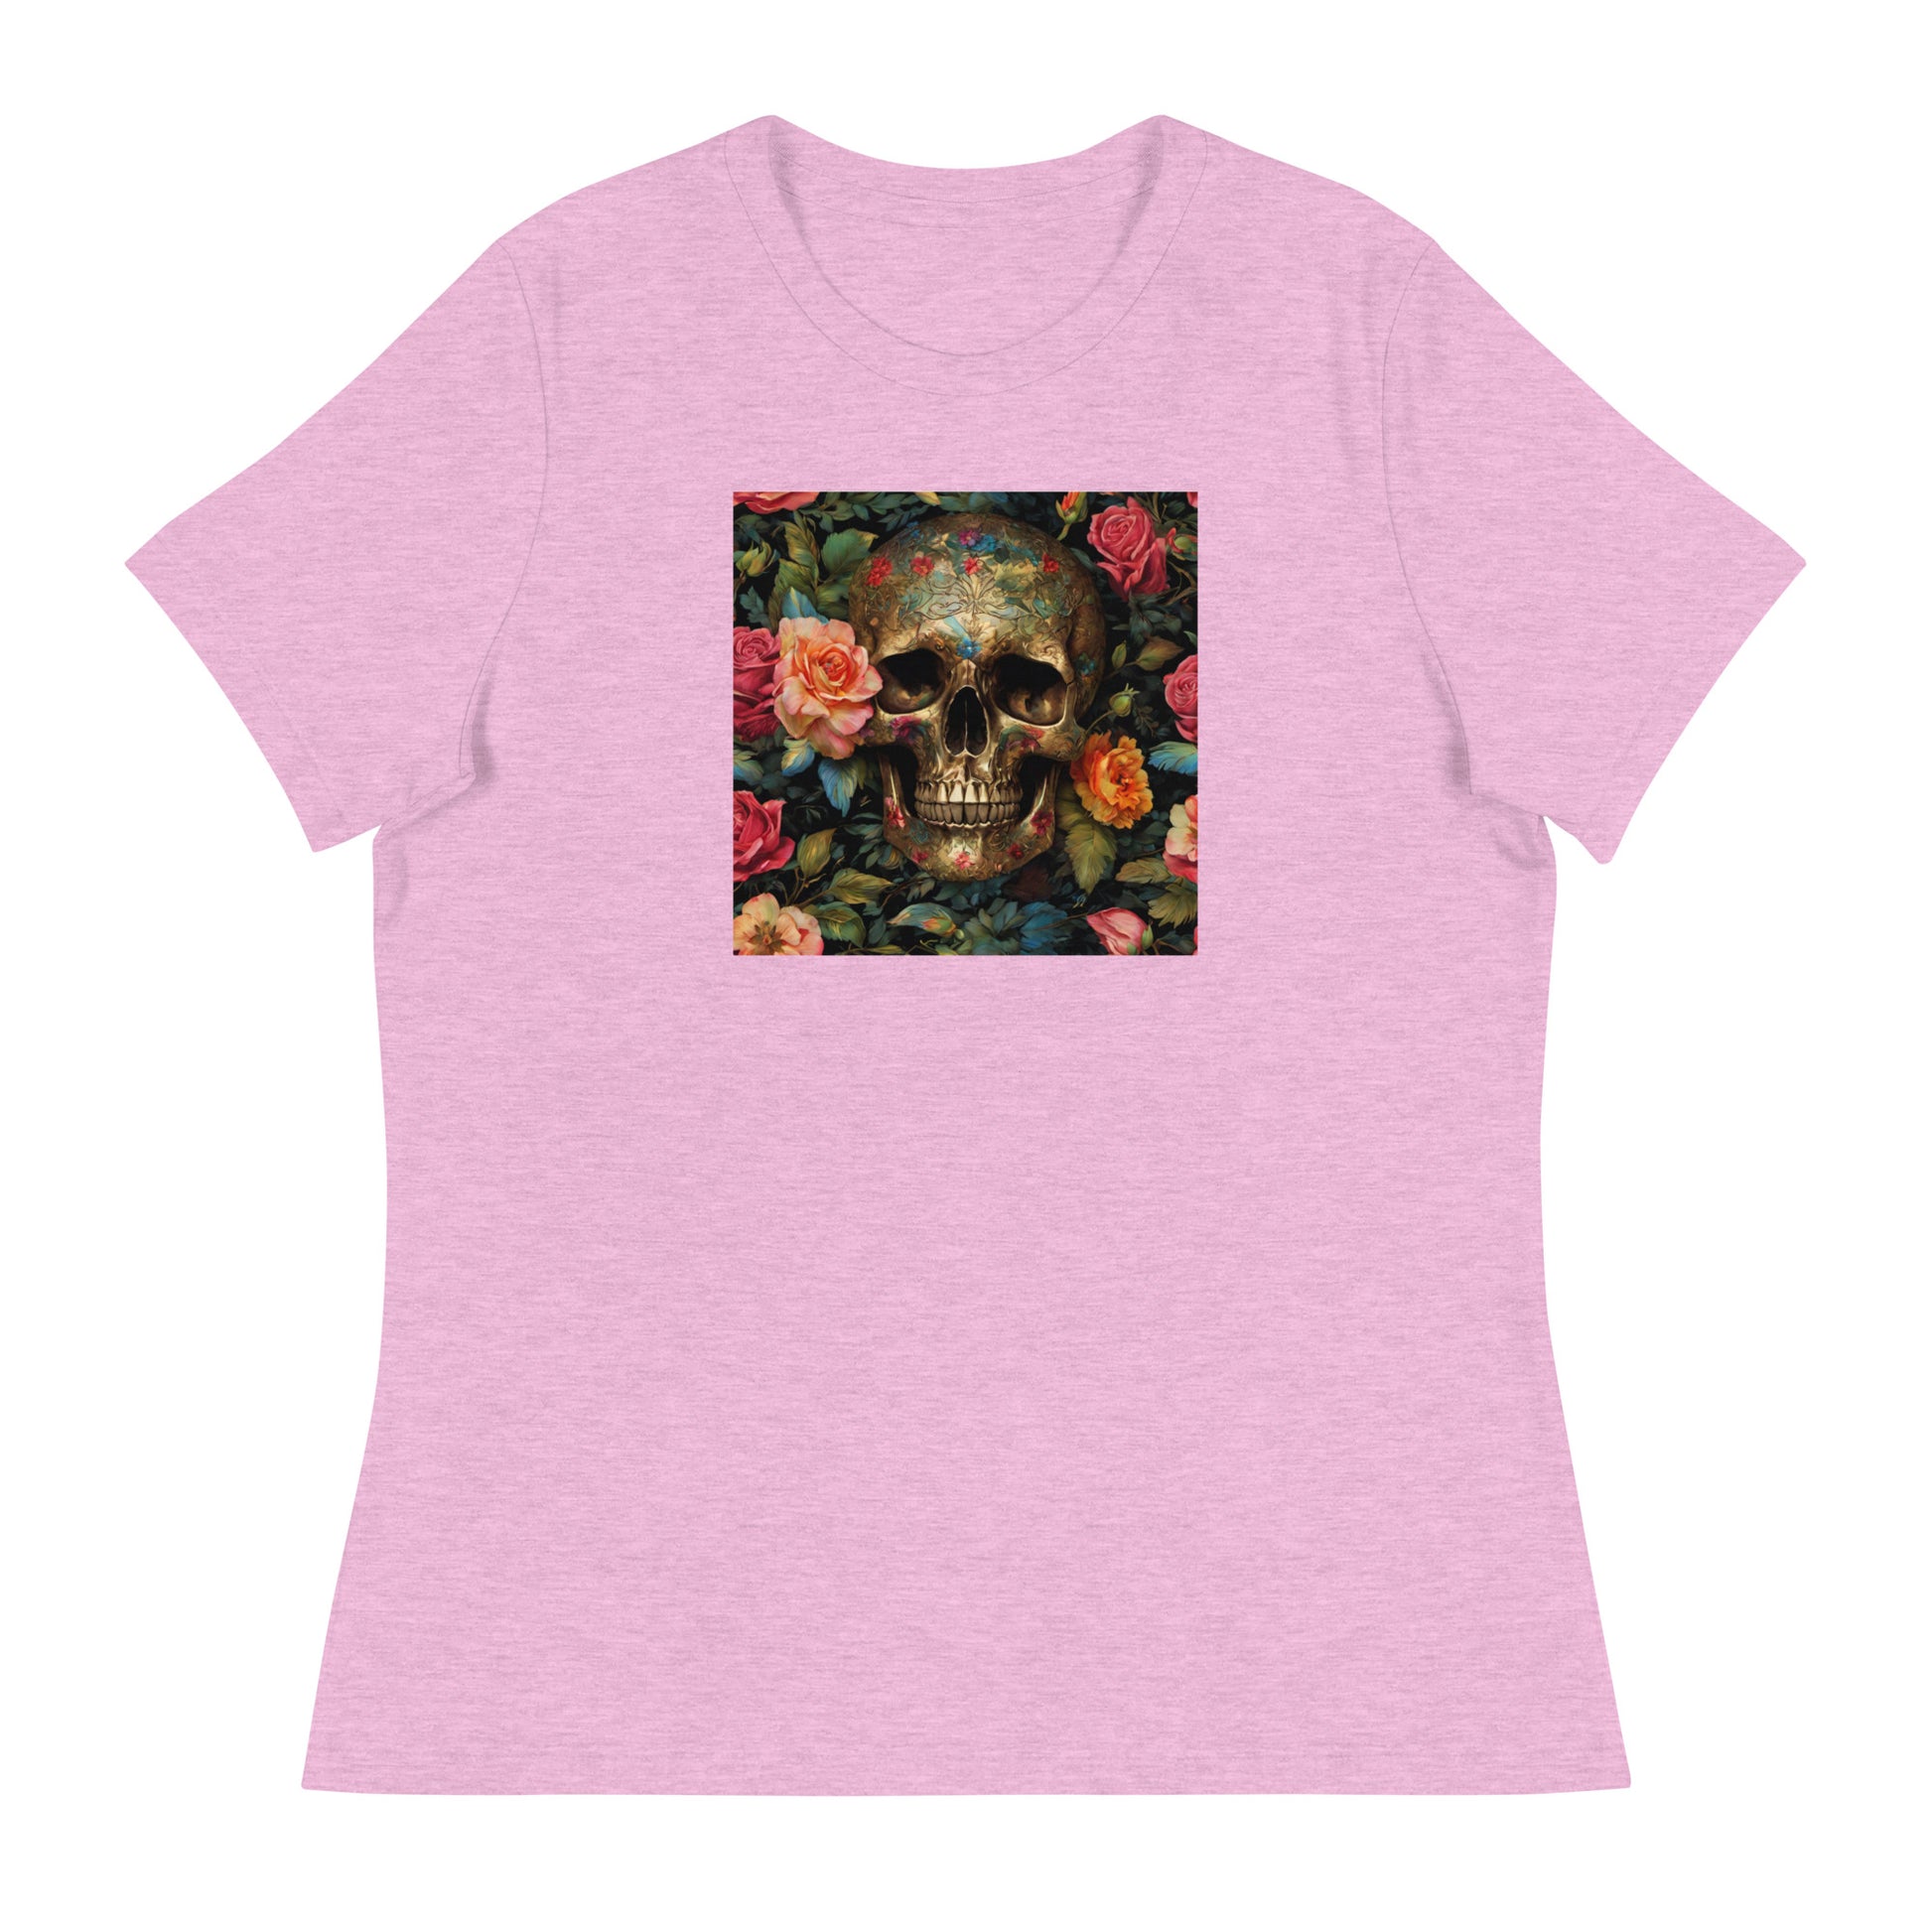 Skull and Roses Graphic Women's T-Shirt Heather Prism Lilac